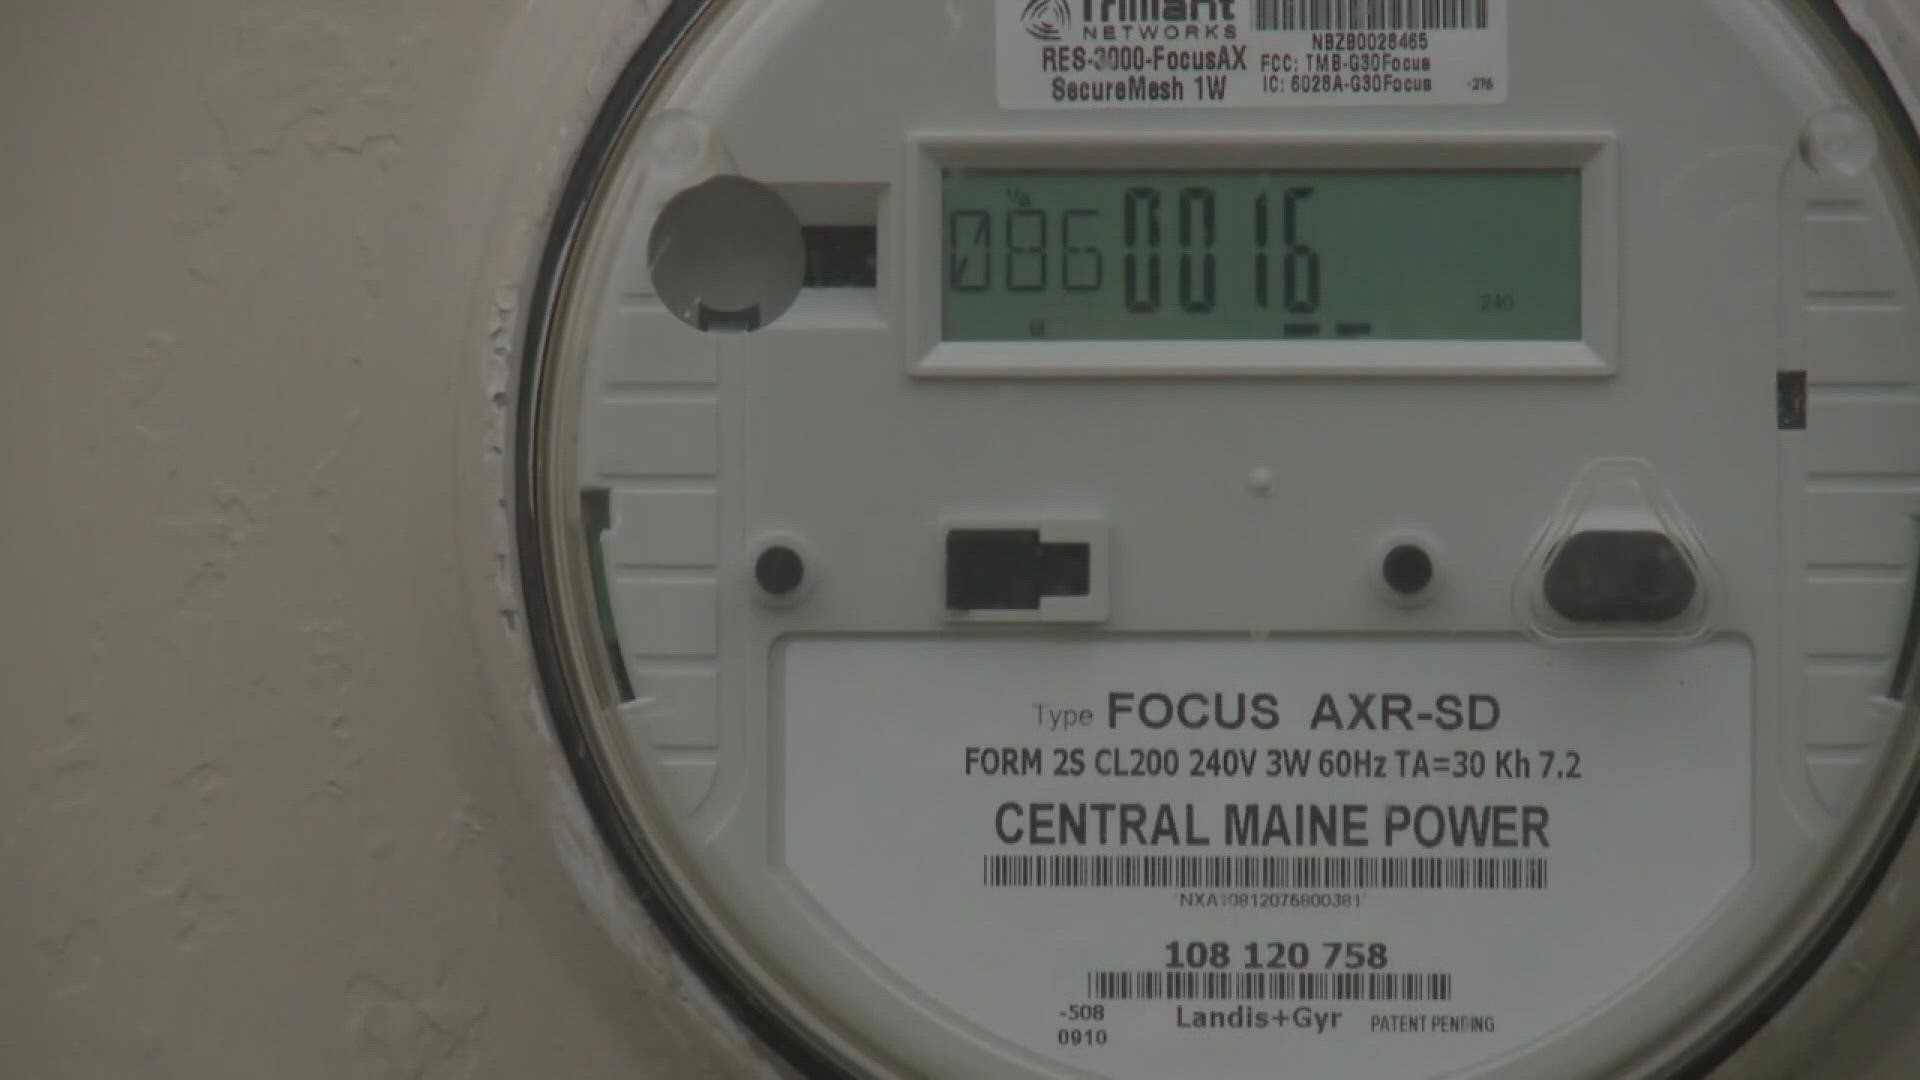 Despite fast-rising energy costs, Maine lawmakers warn relief could be slow.